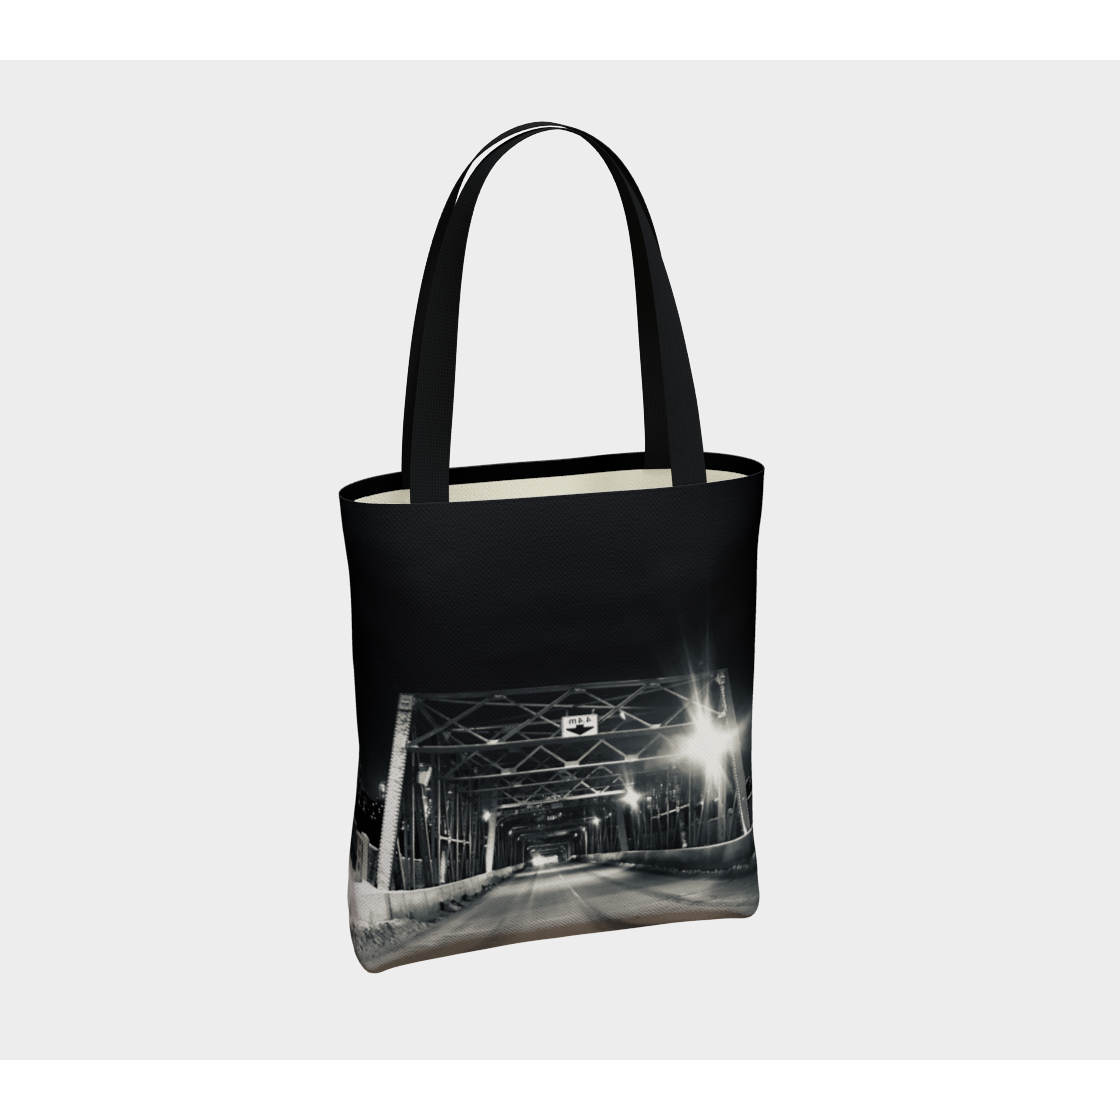 Tote Bag for Women with: Bridge at Night Design, Light inside